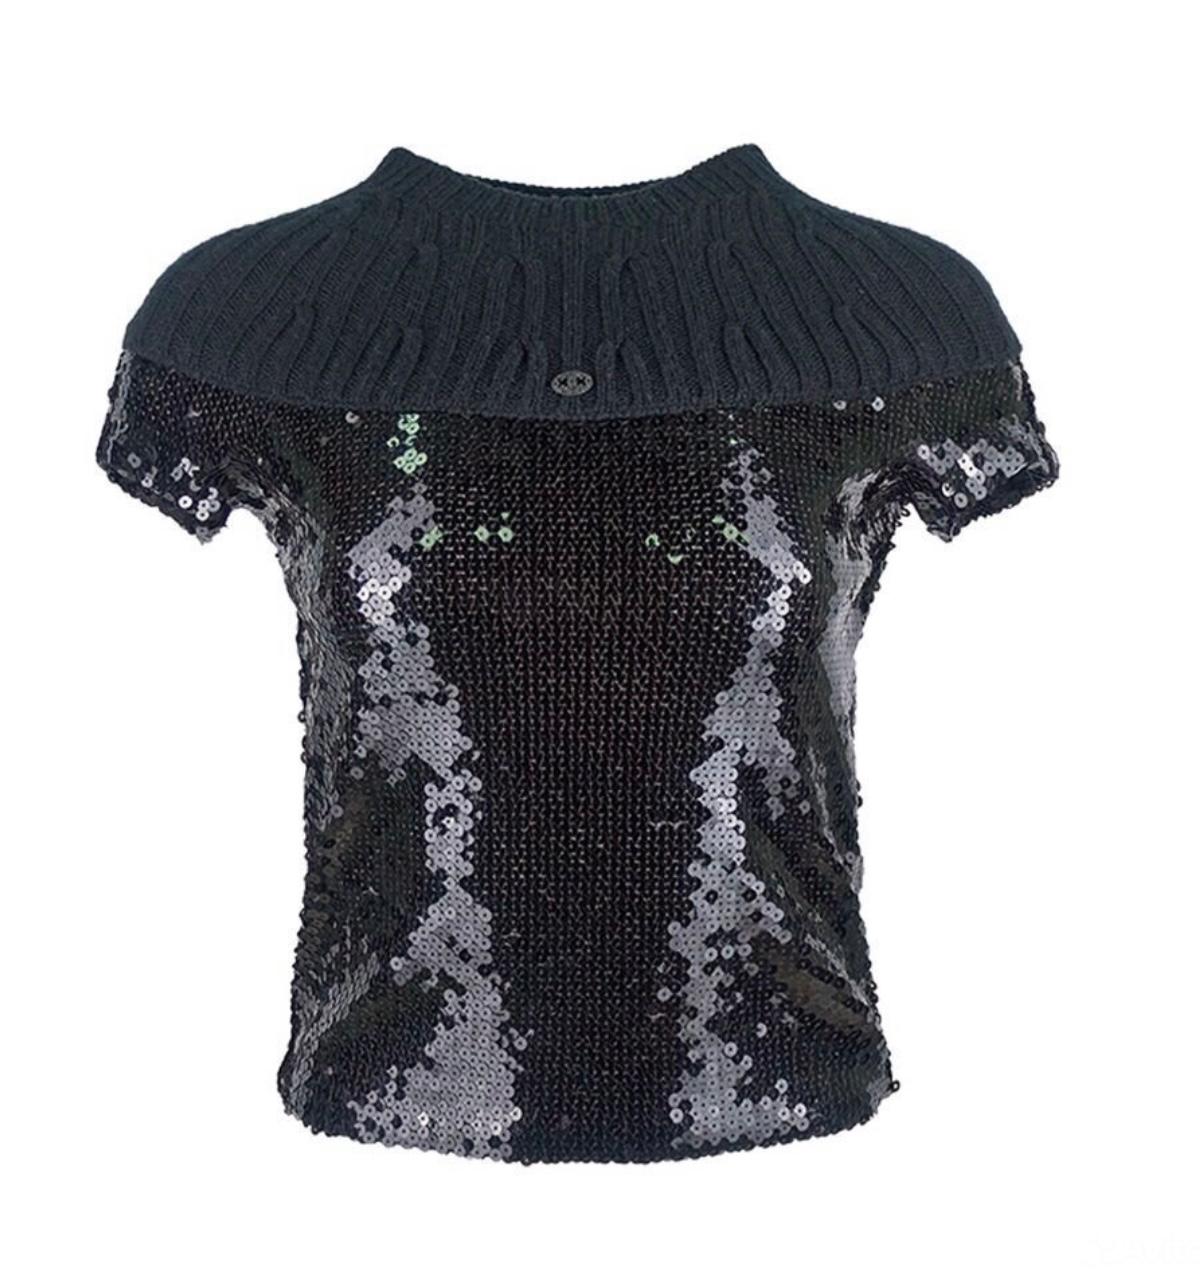 Chanel black cashmere and sequins top with CC logo charm from Paris / LONDON Collection, metiers d'Art
Boutique price for sequined items by Chanel is traditionally very high.
Size mark 36 FR. Pristine condition. 